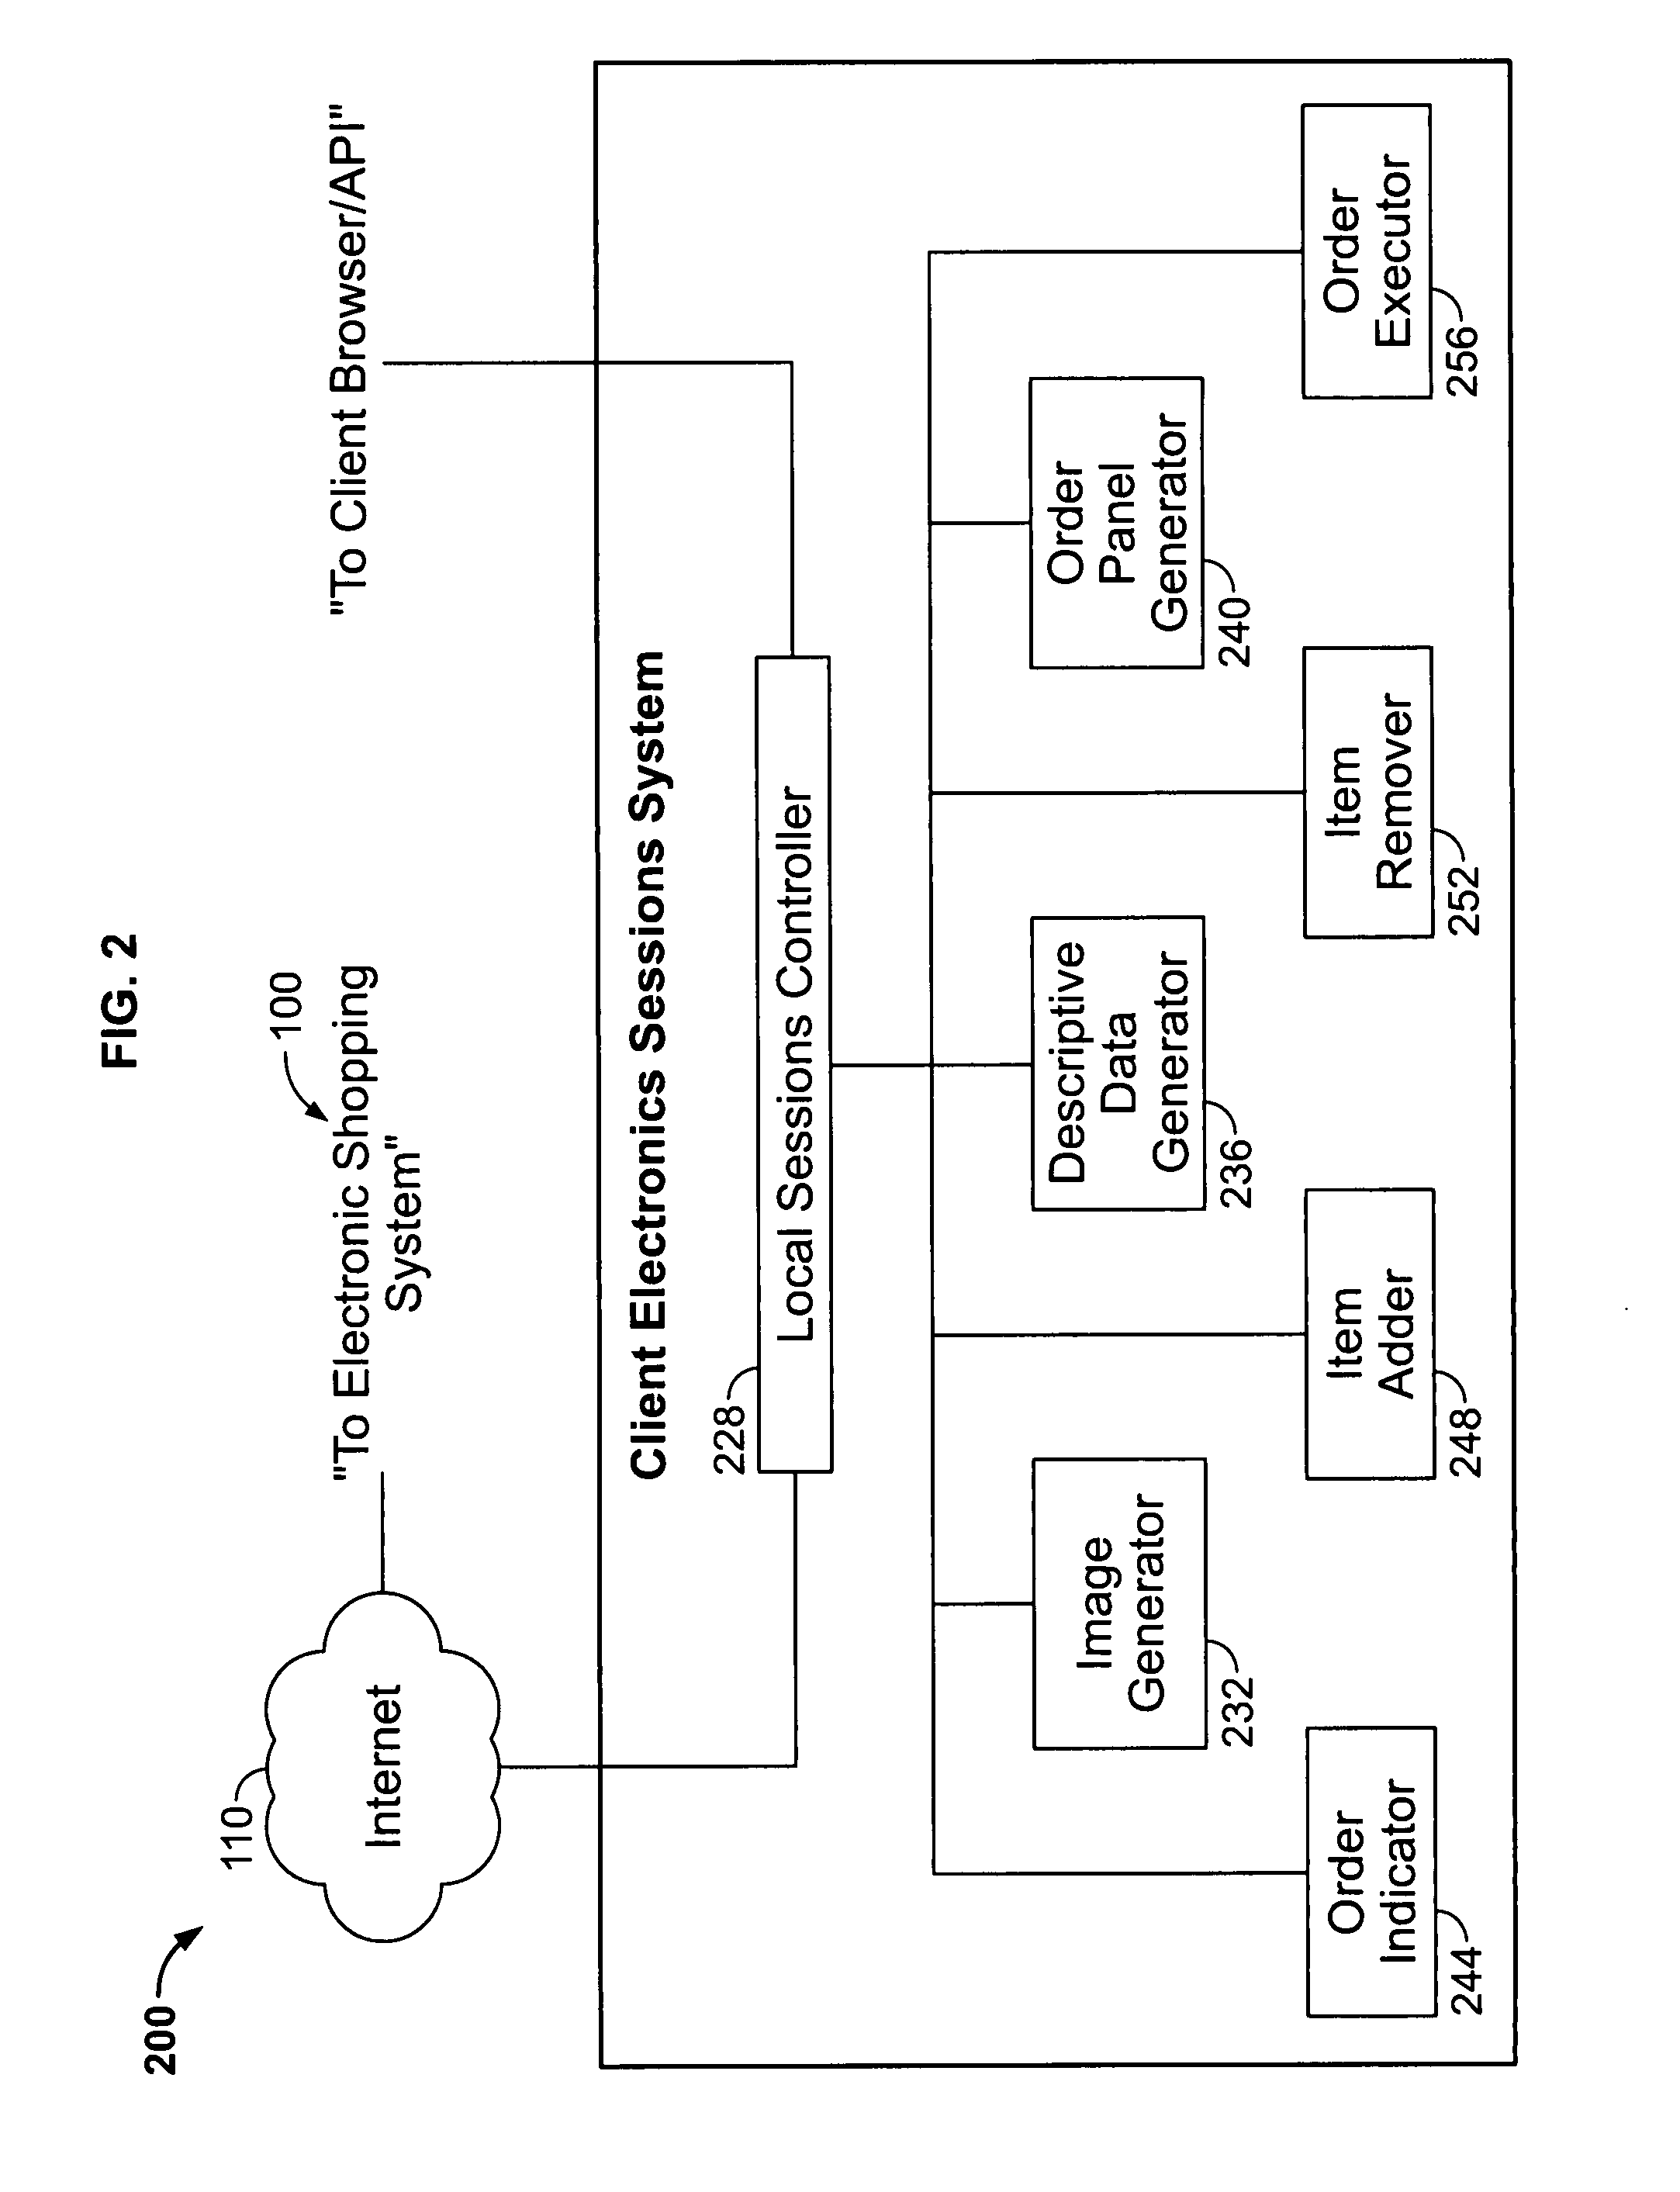 Method, system and computer program product for ordering merchandise in a global computer network environment